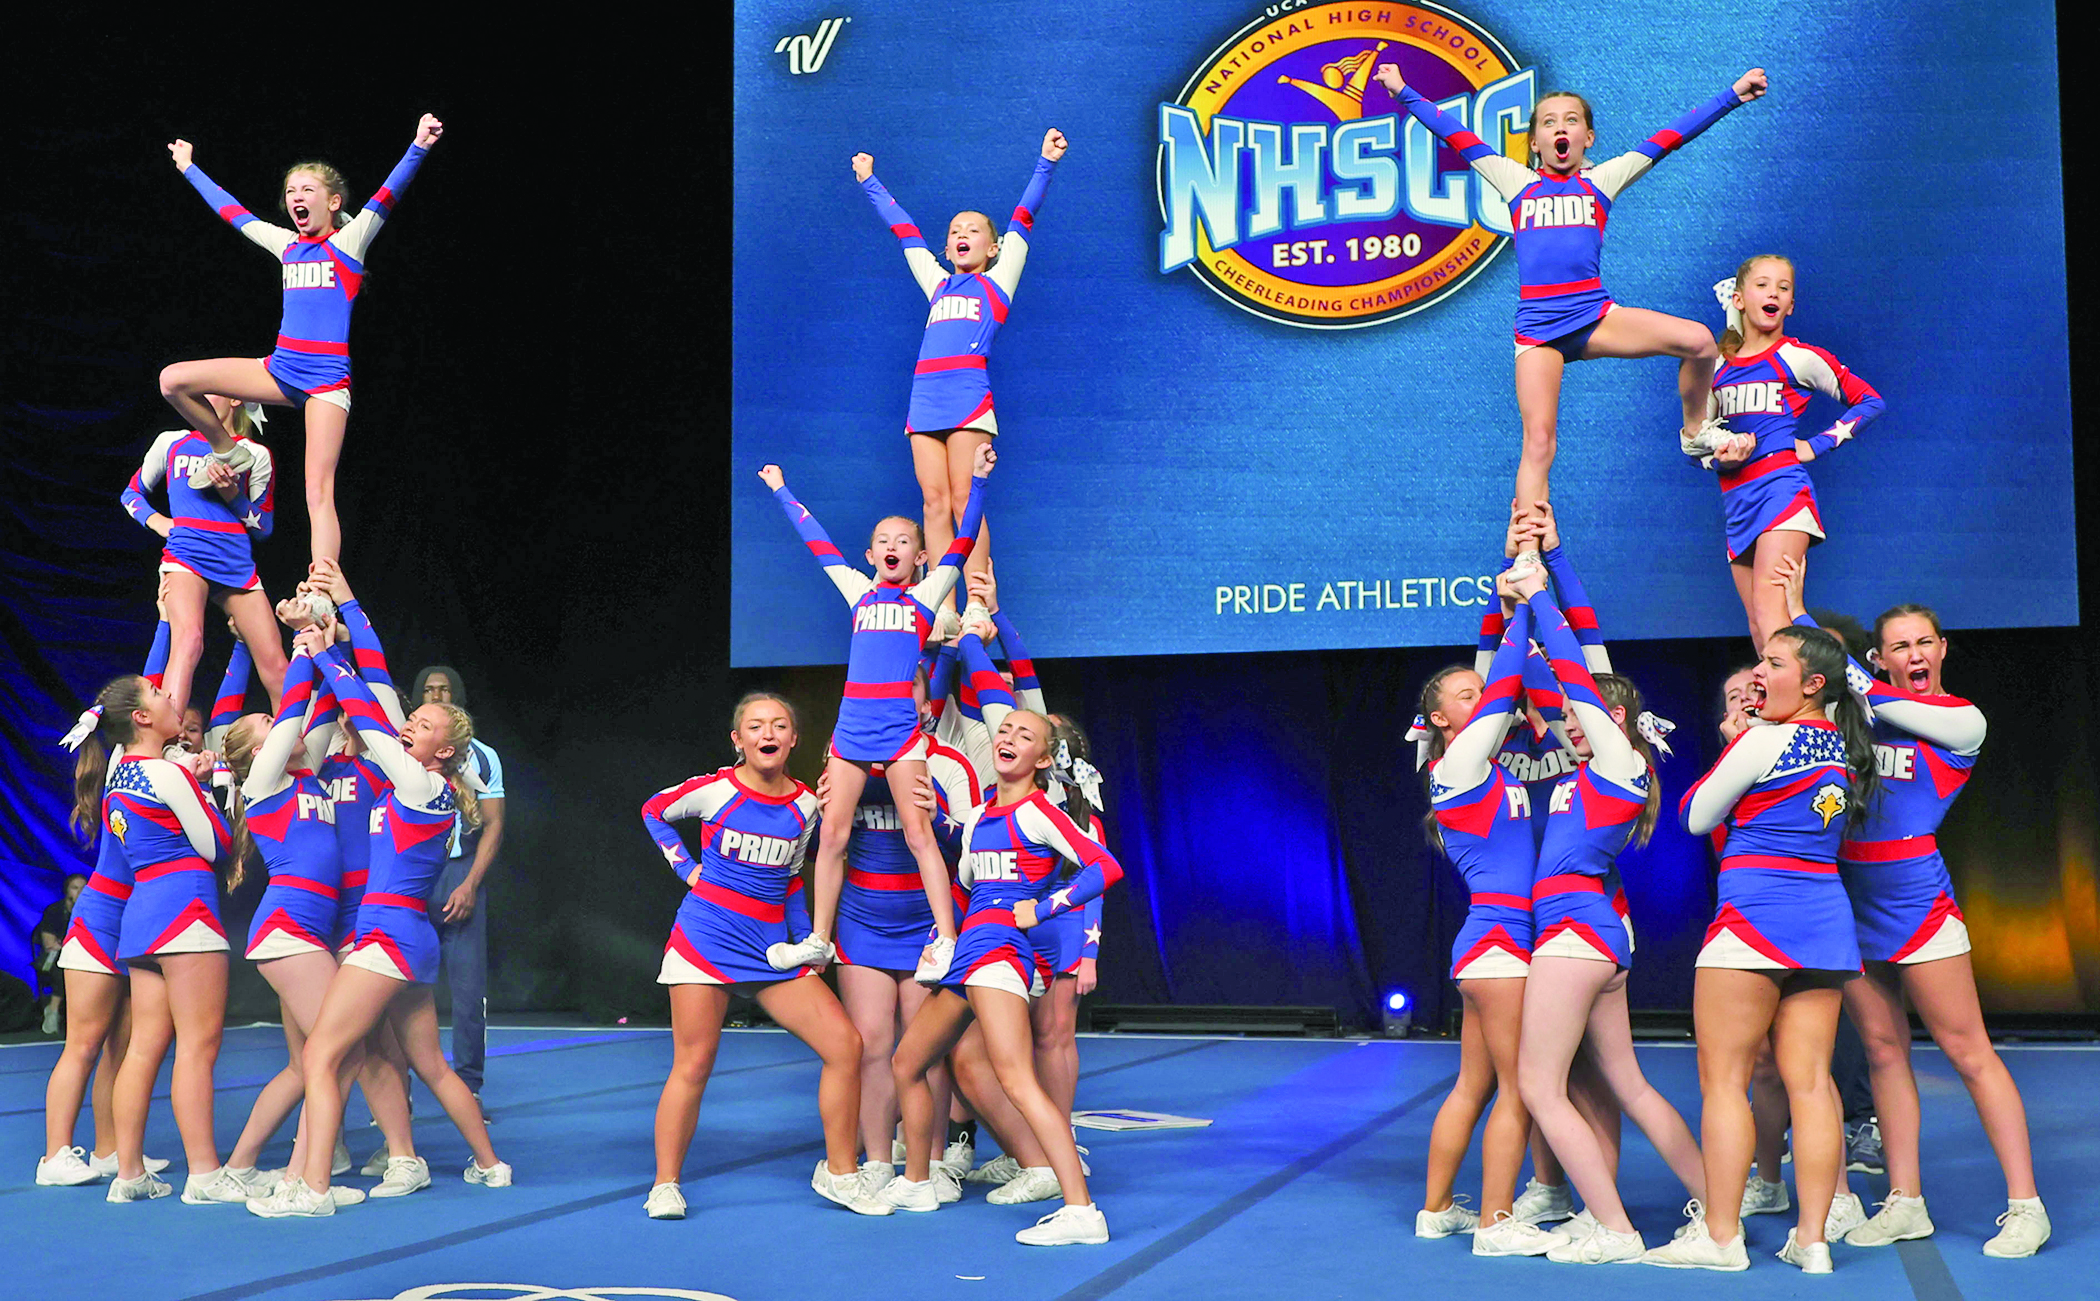 Global Domination:  Pride Athletics Triumphs on World Stage Bringing Home Two World Titles and the Nation's Cup